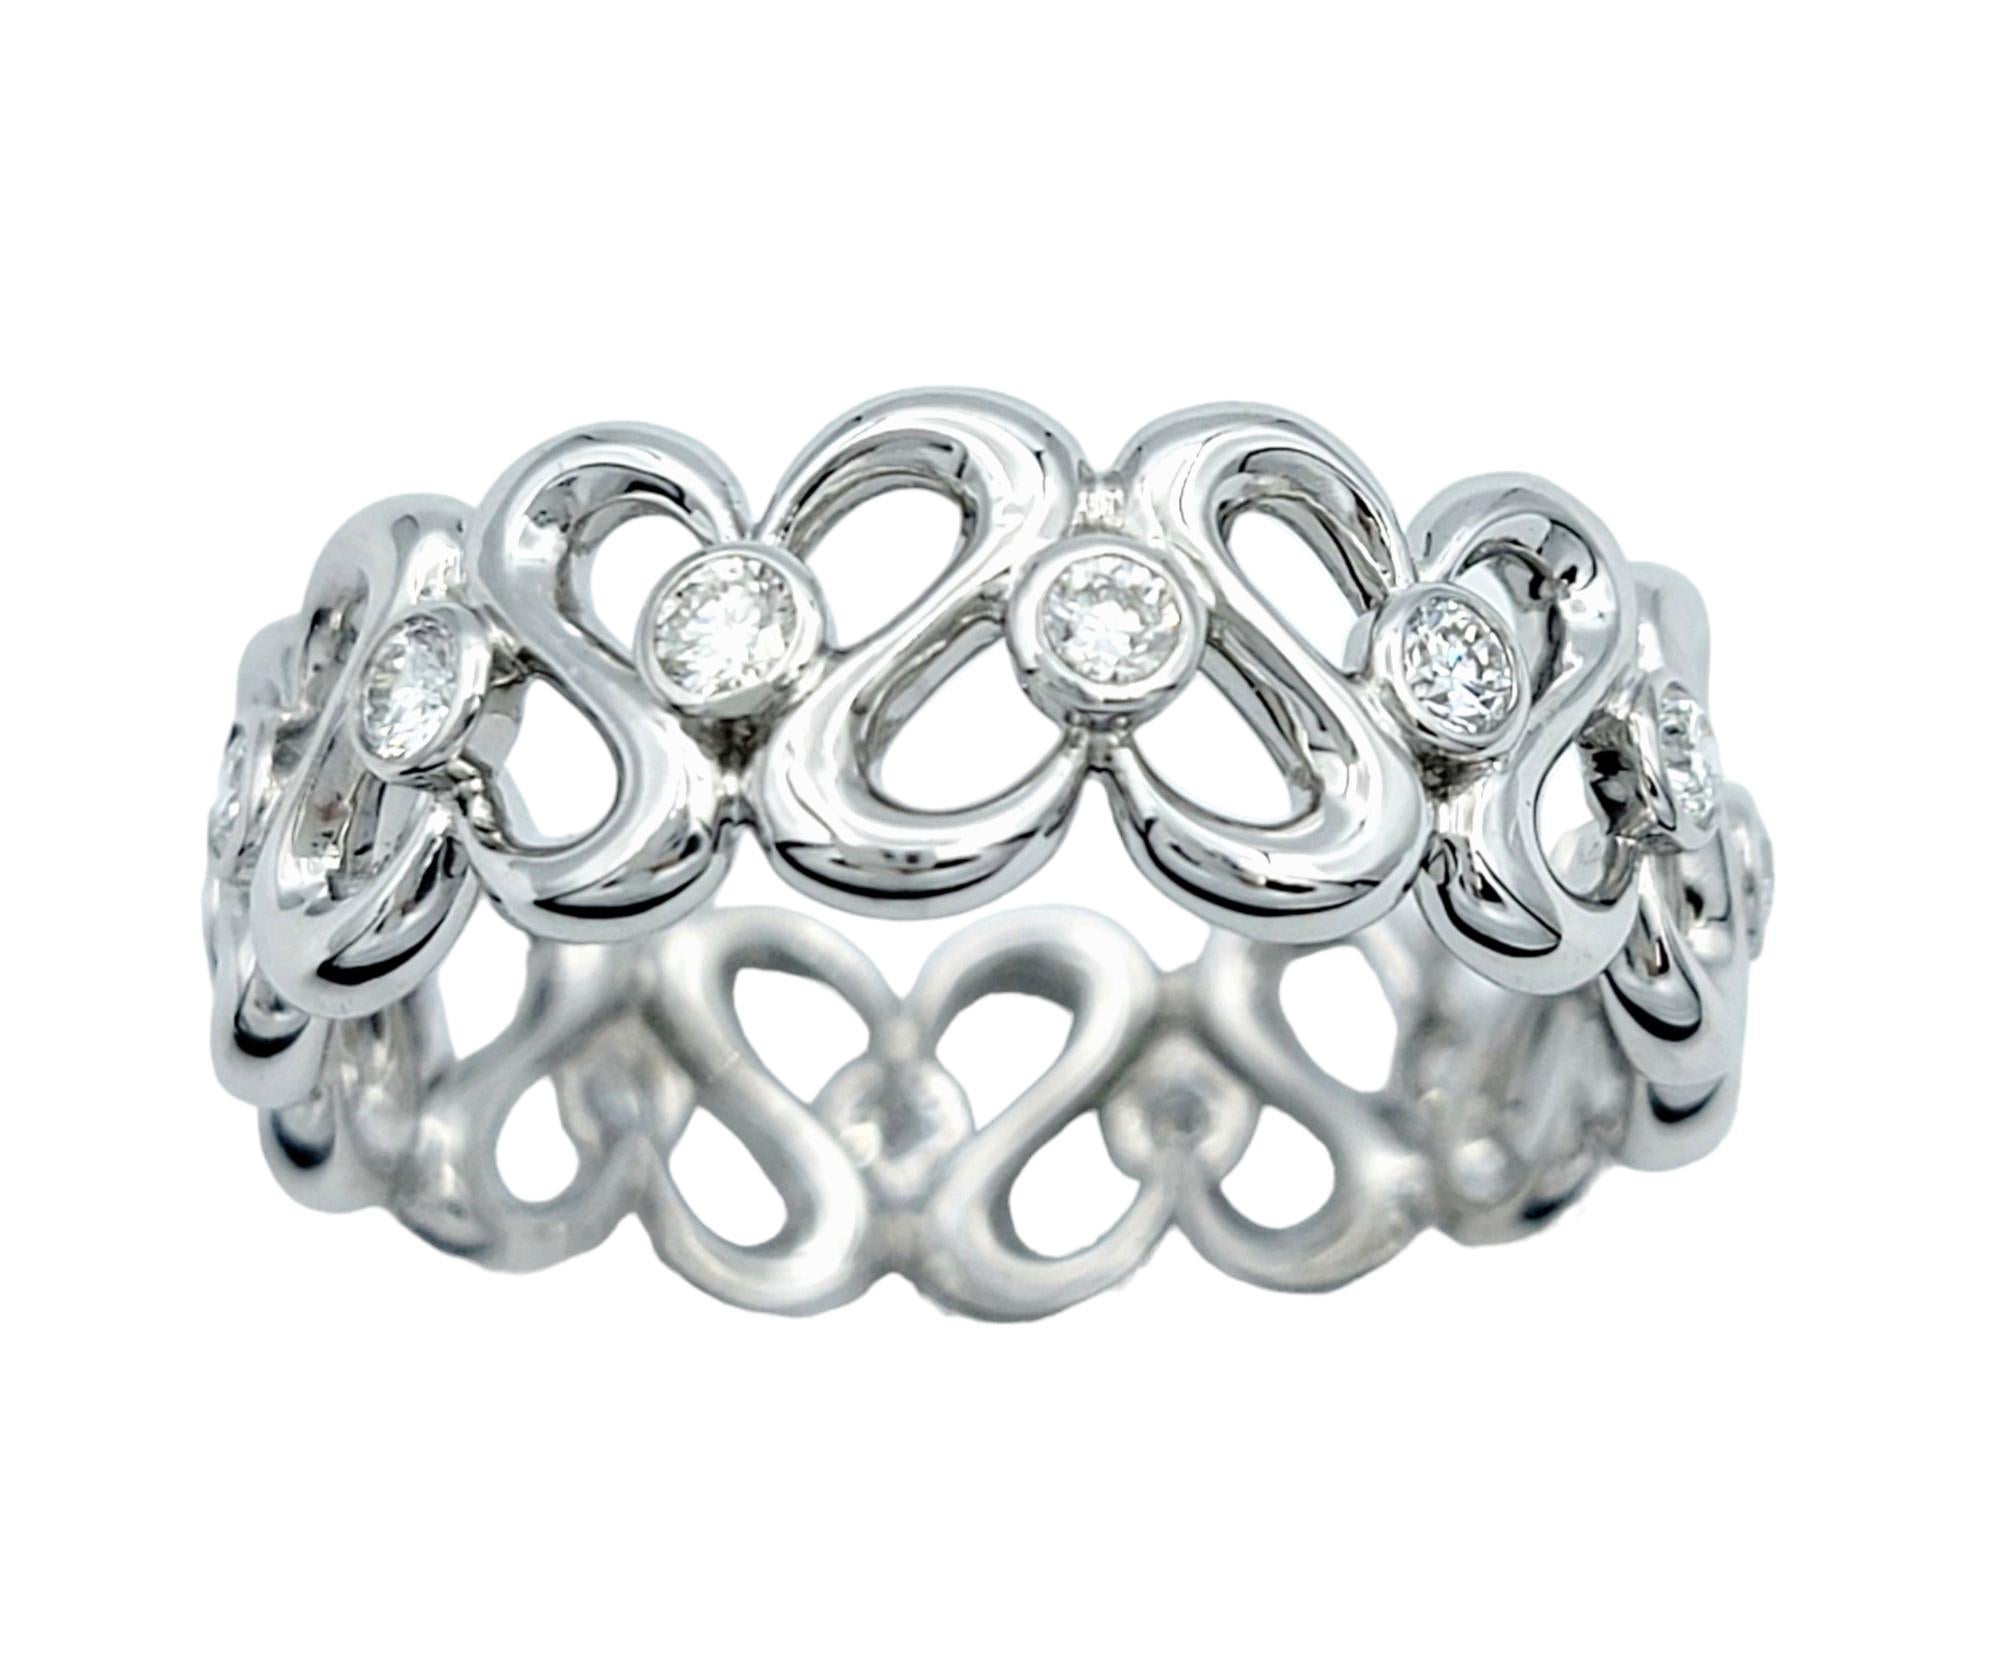 Ring Size: 7.75

This beautiful band ring, set in elegant 18 karat white gold, features a delightful open heart motif design that exudes charm and romance. A continuous loop forms various hearts, each adorned with a sparkling diamond at its center.